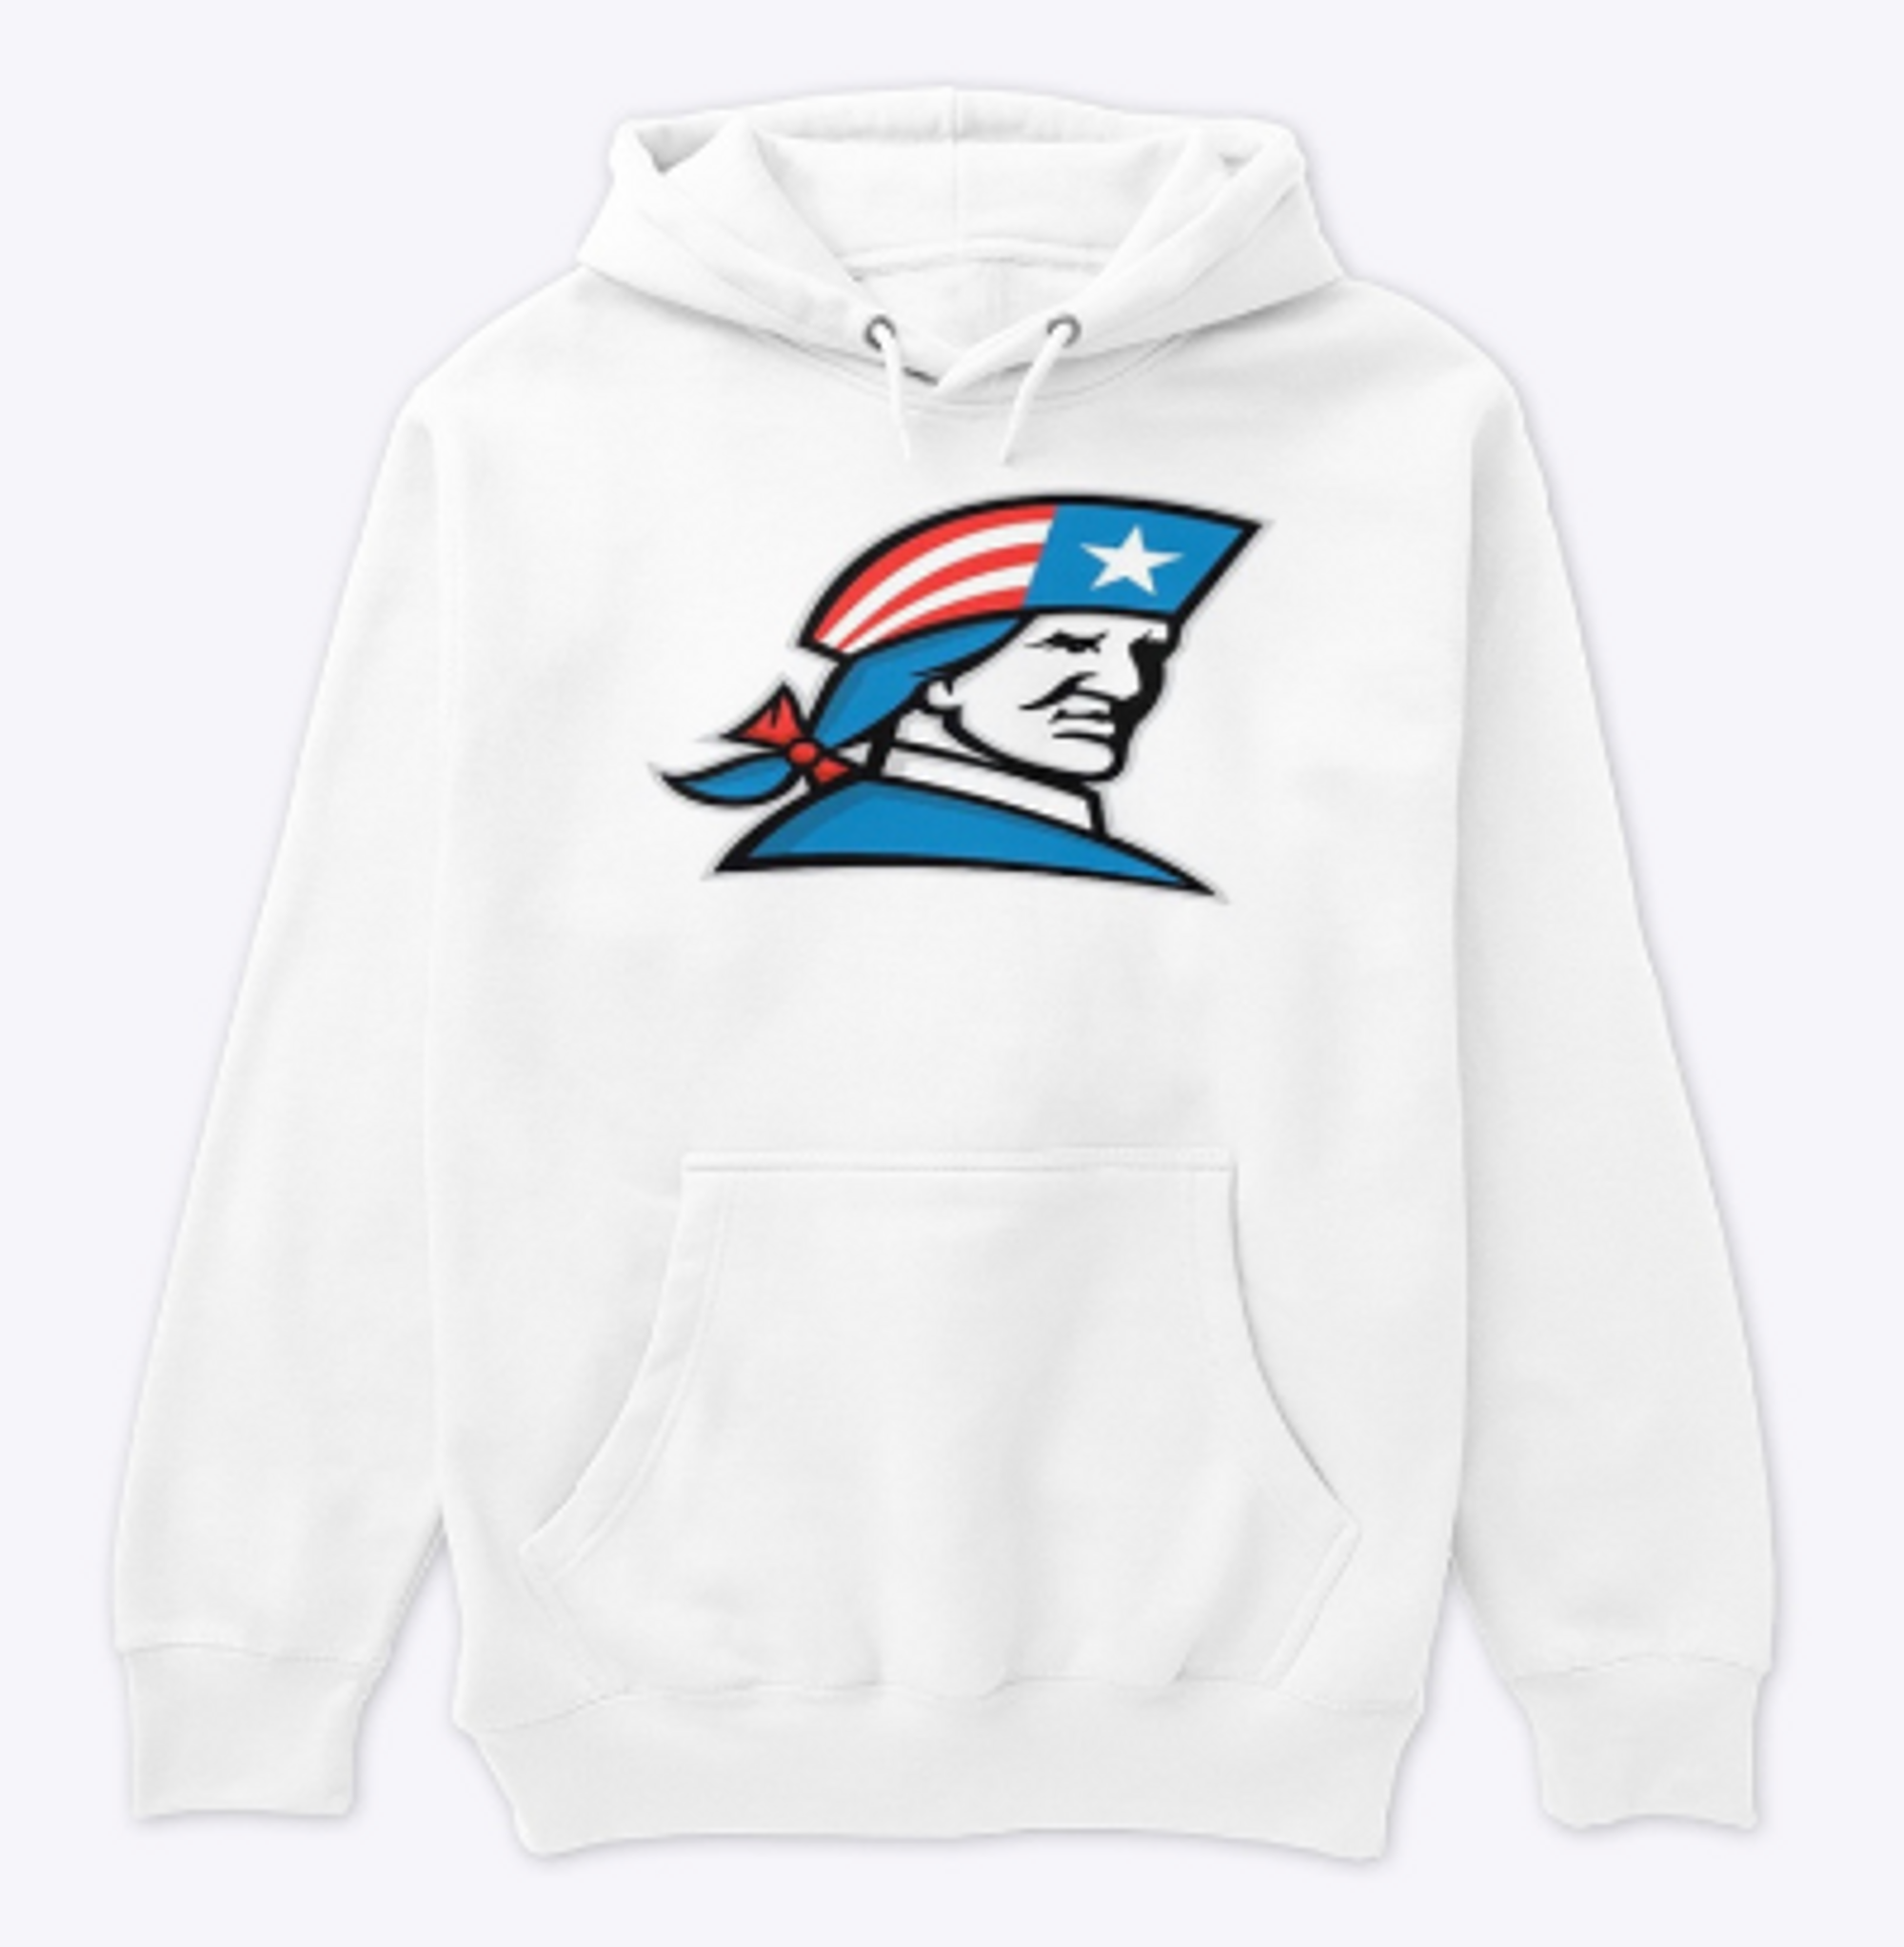 Patriot Hoodies limited time only!